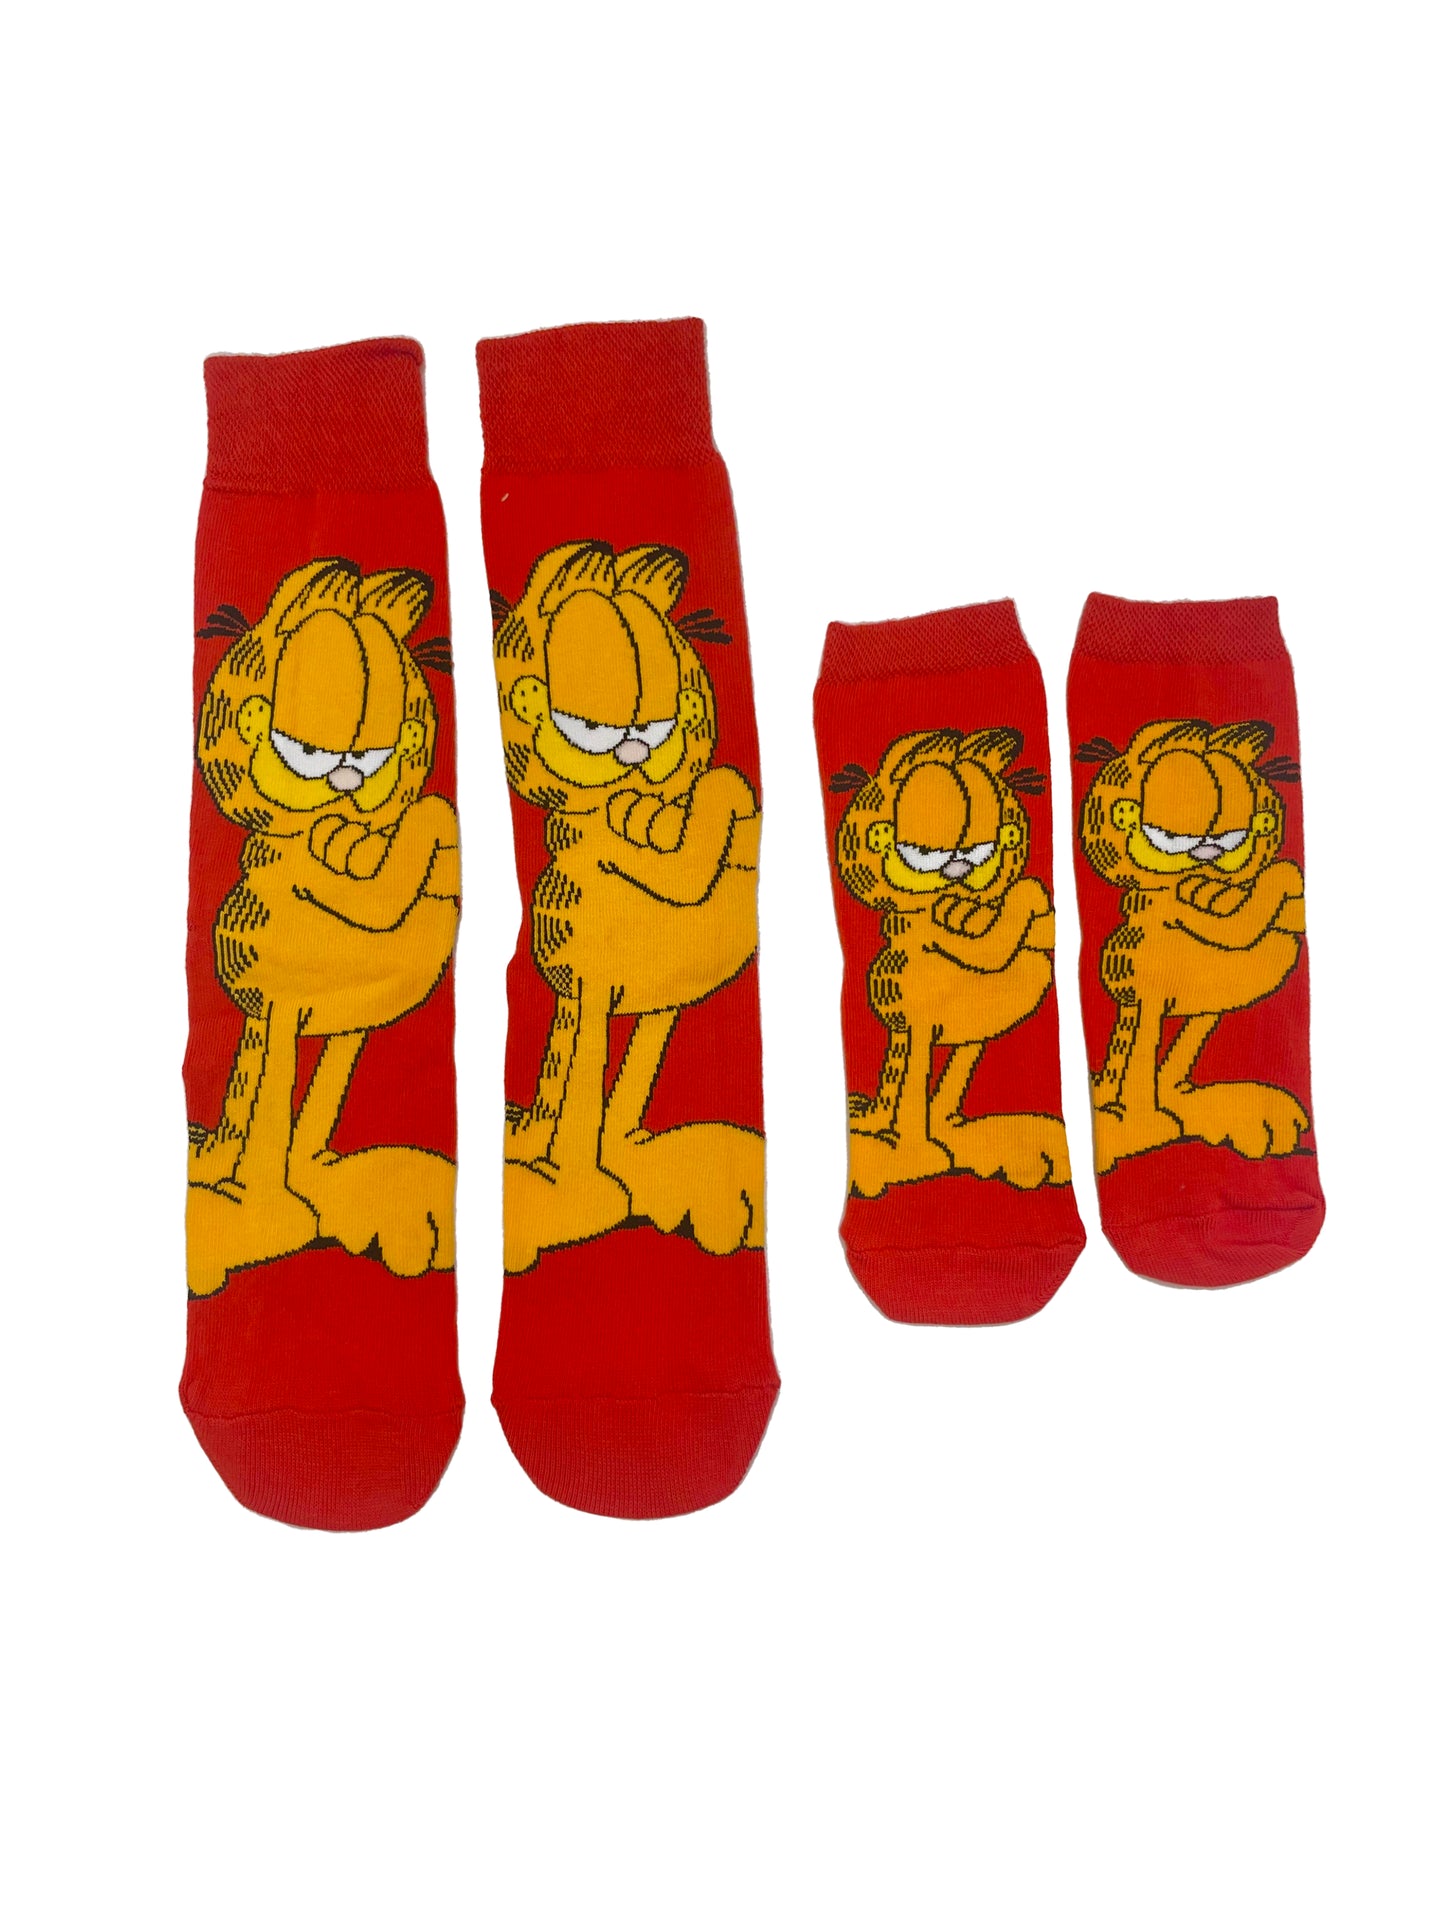 Mini-Me Match: Adorable Garfield Sock Set for Parents and Kids